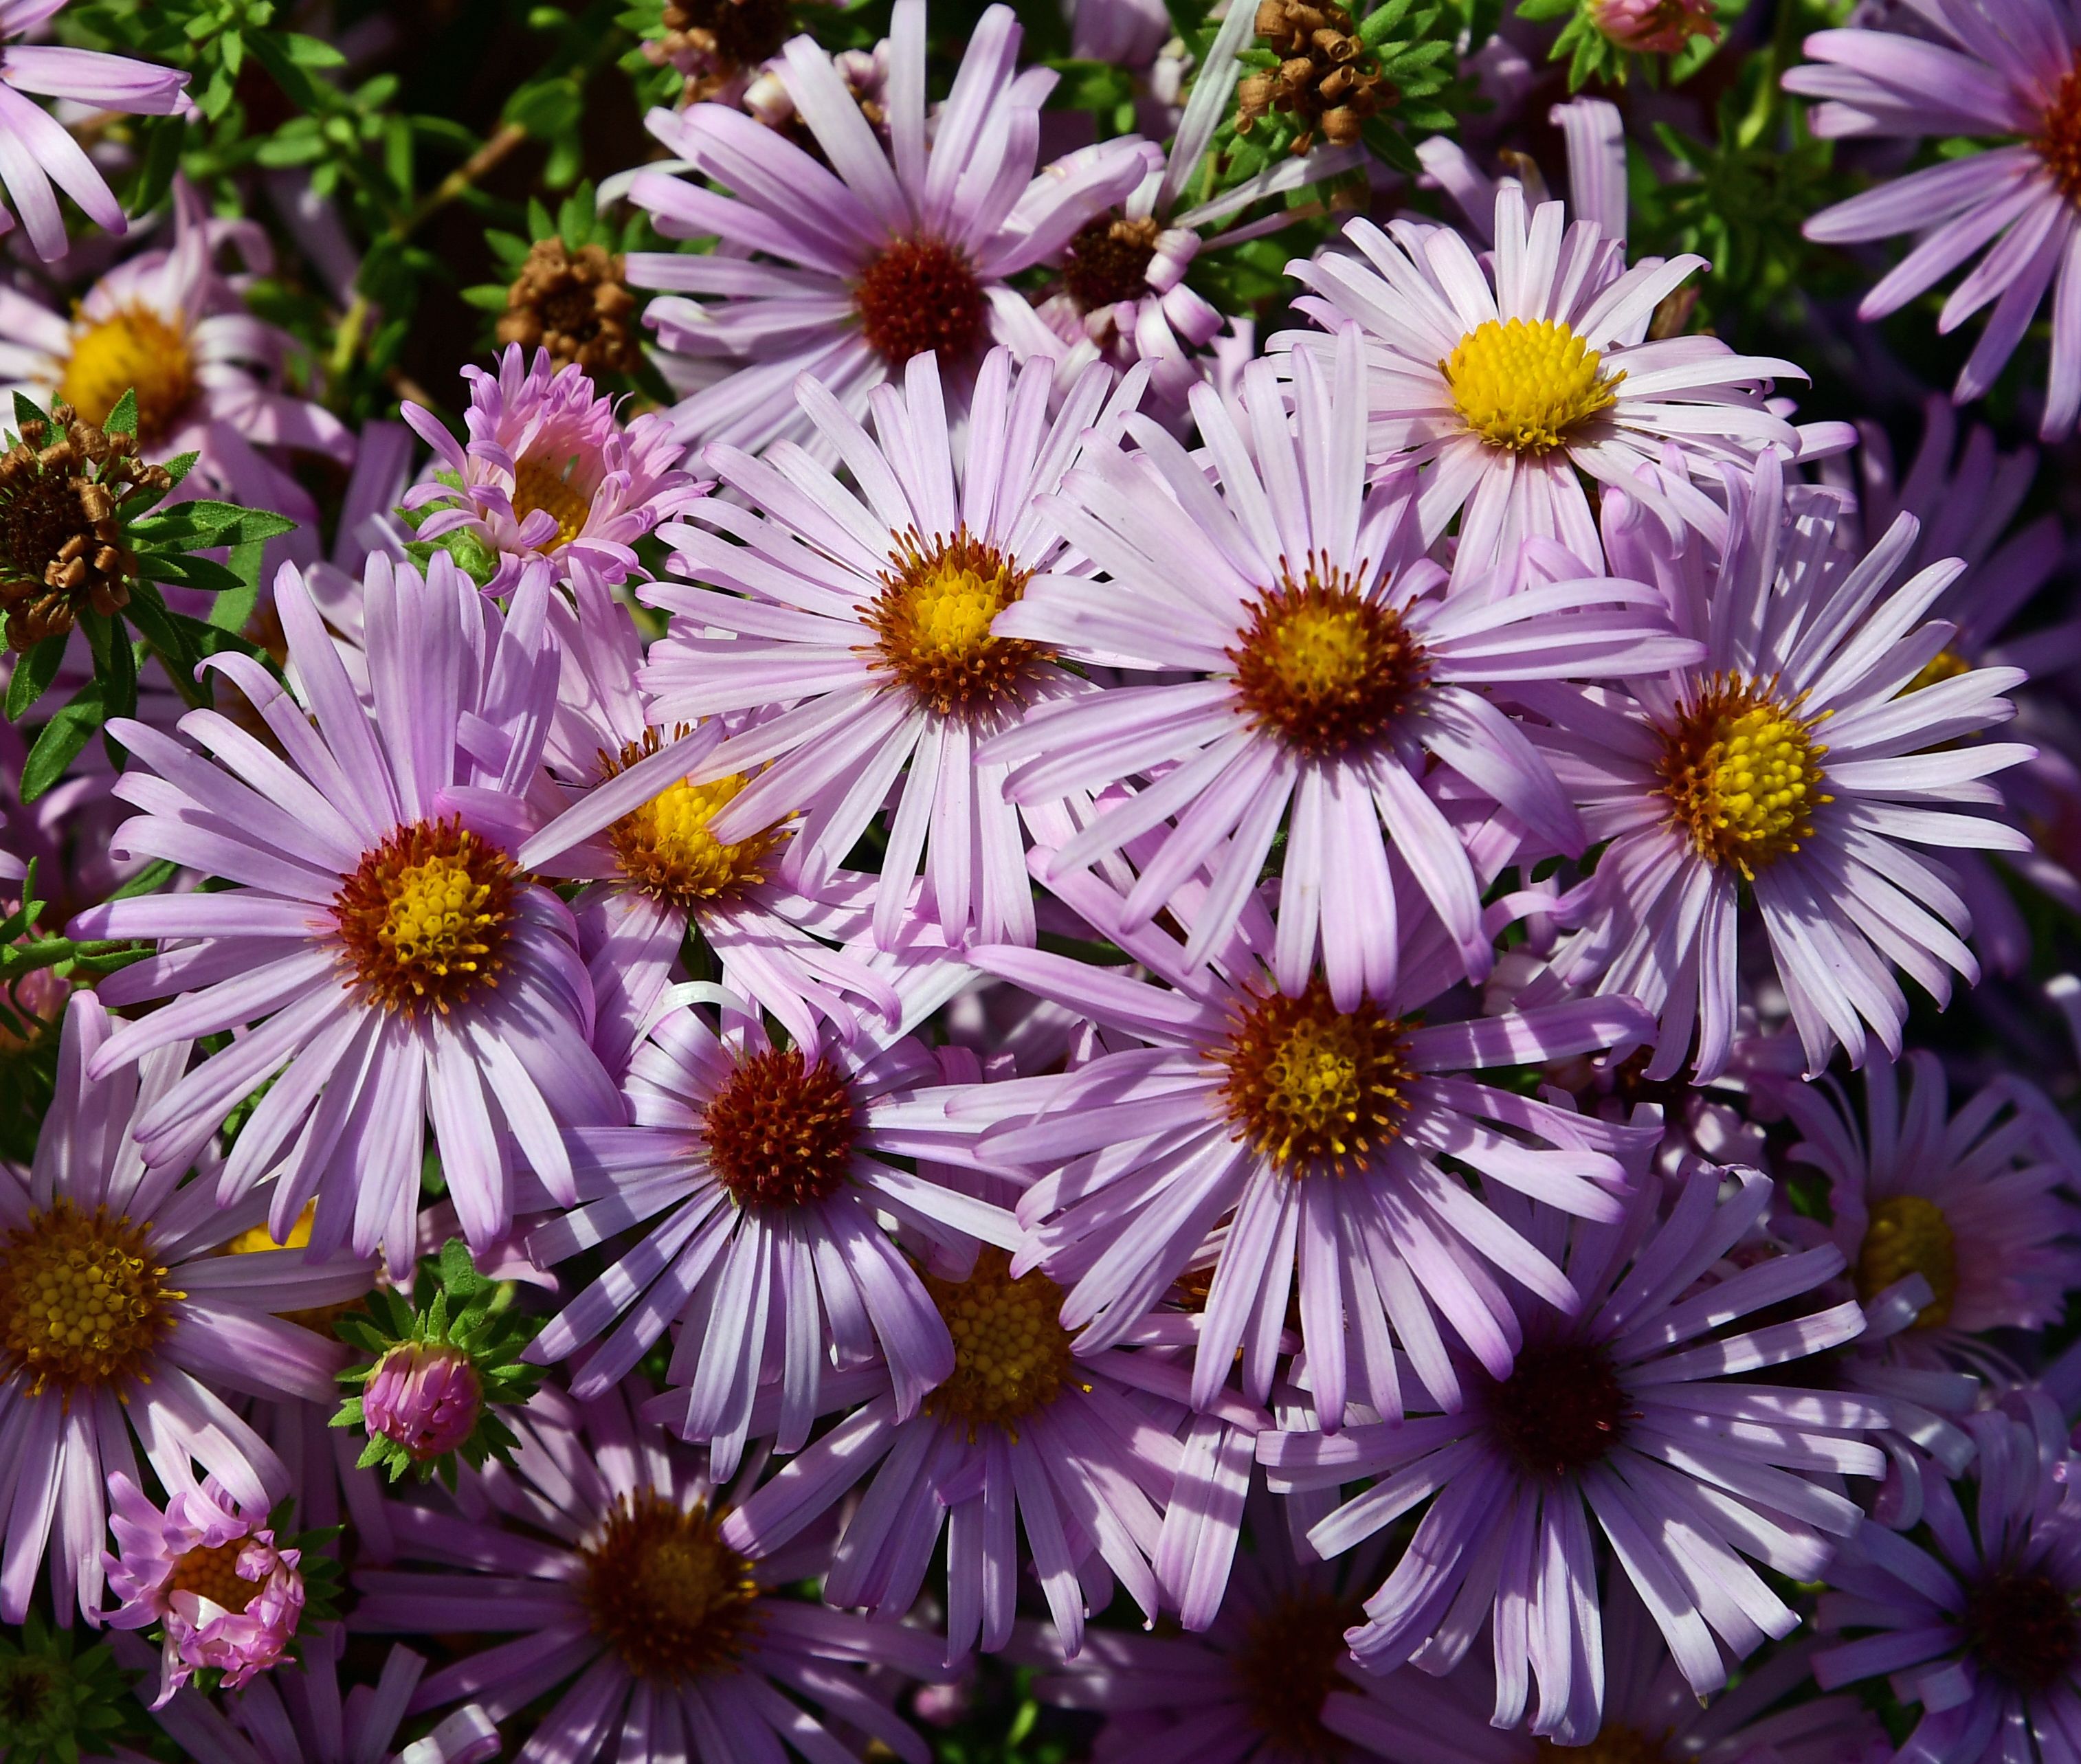 images/plants/aster/ast-cotton-candy/ast-cotton-candy-0007.jpg